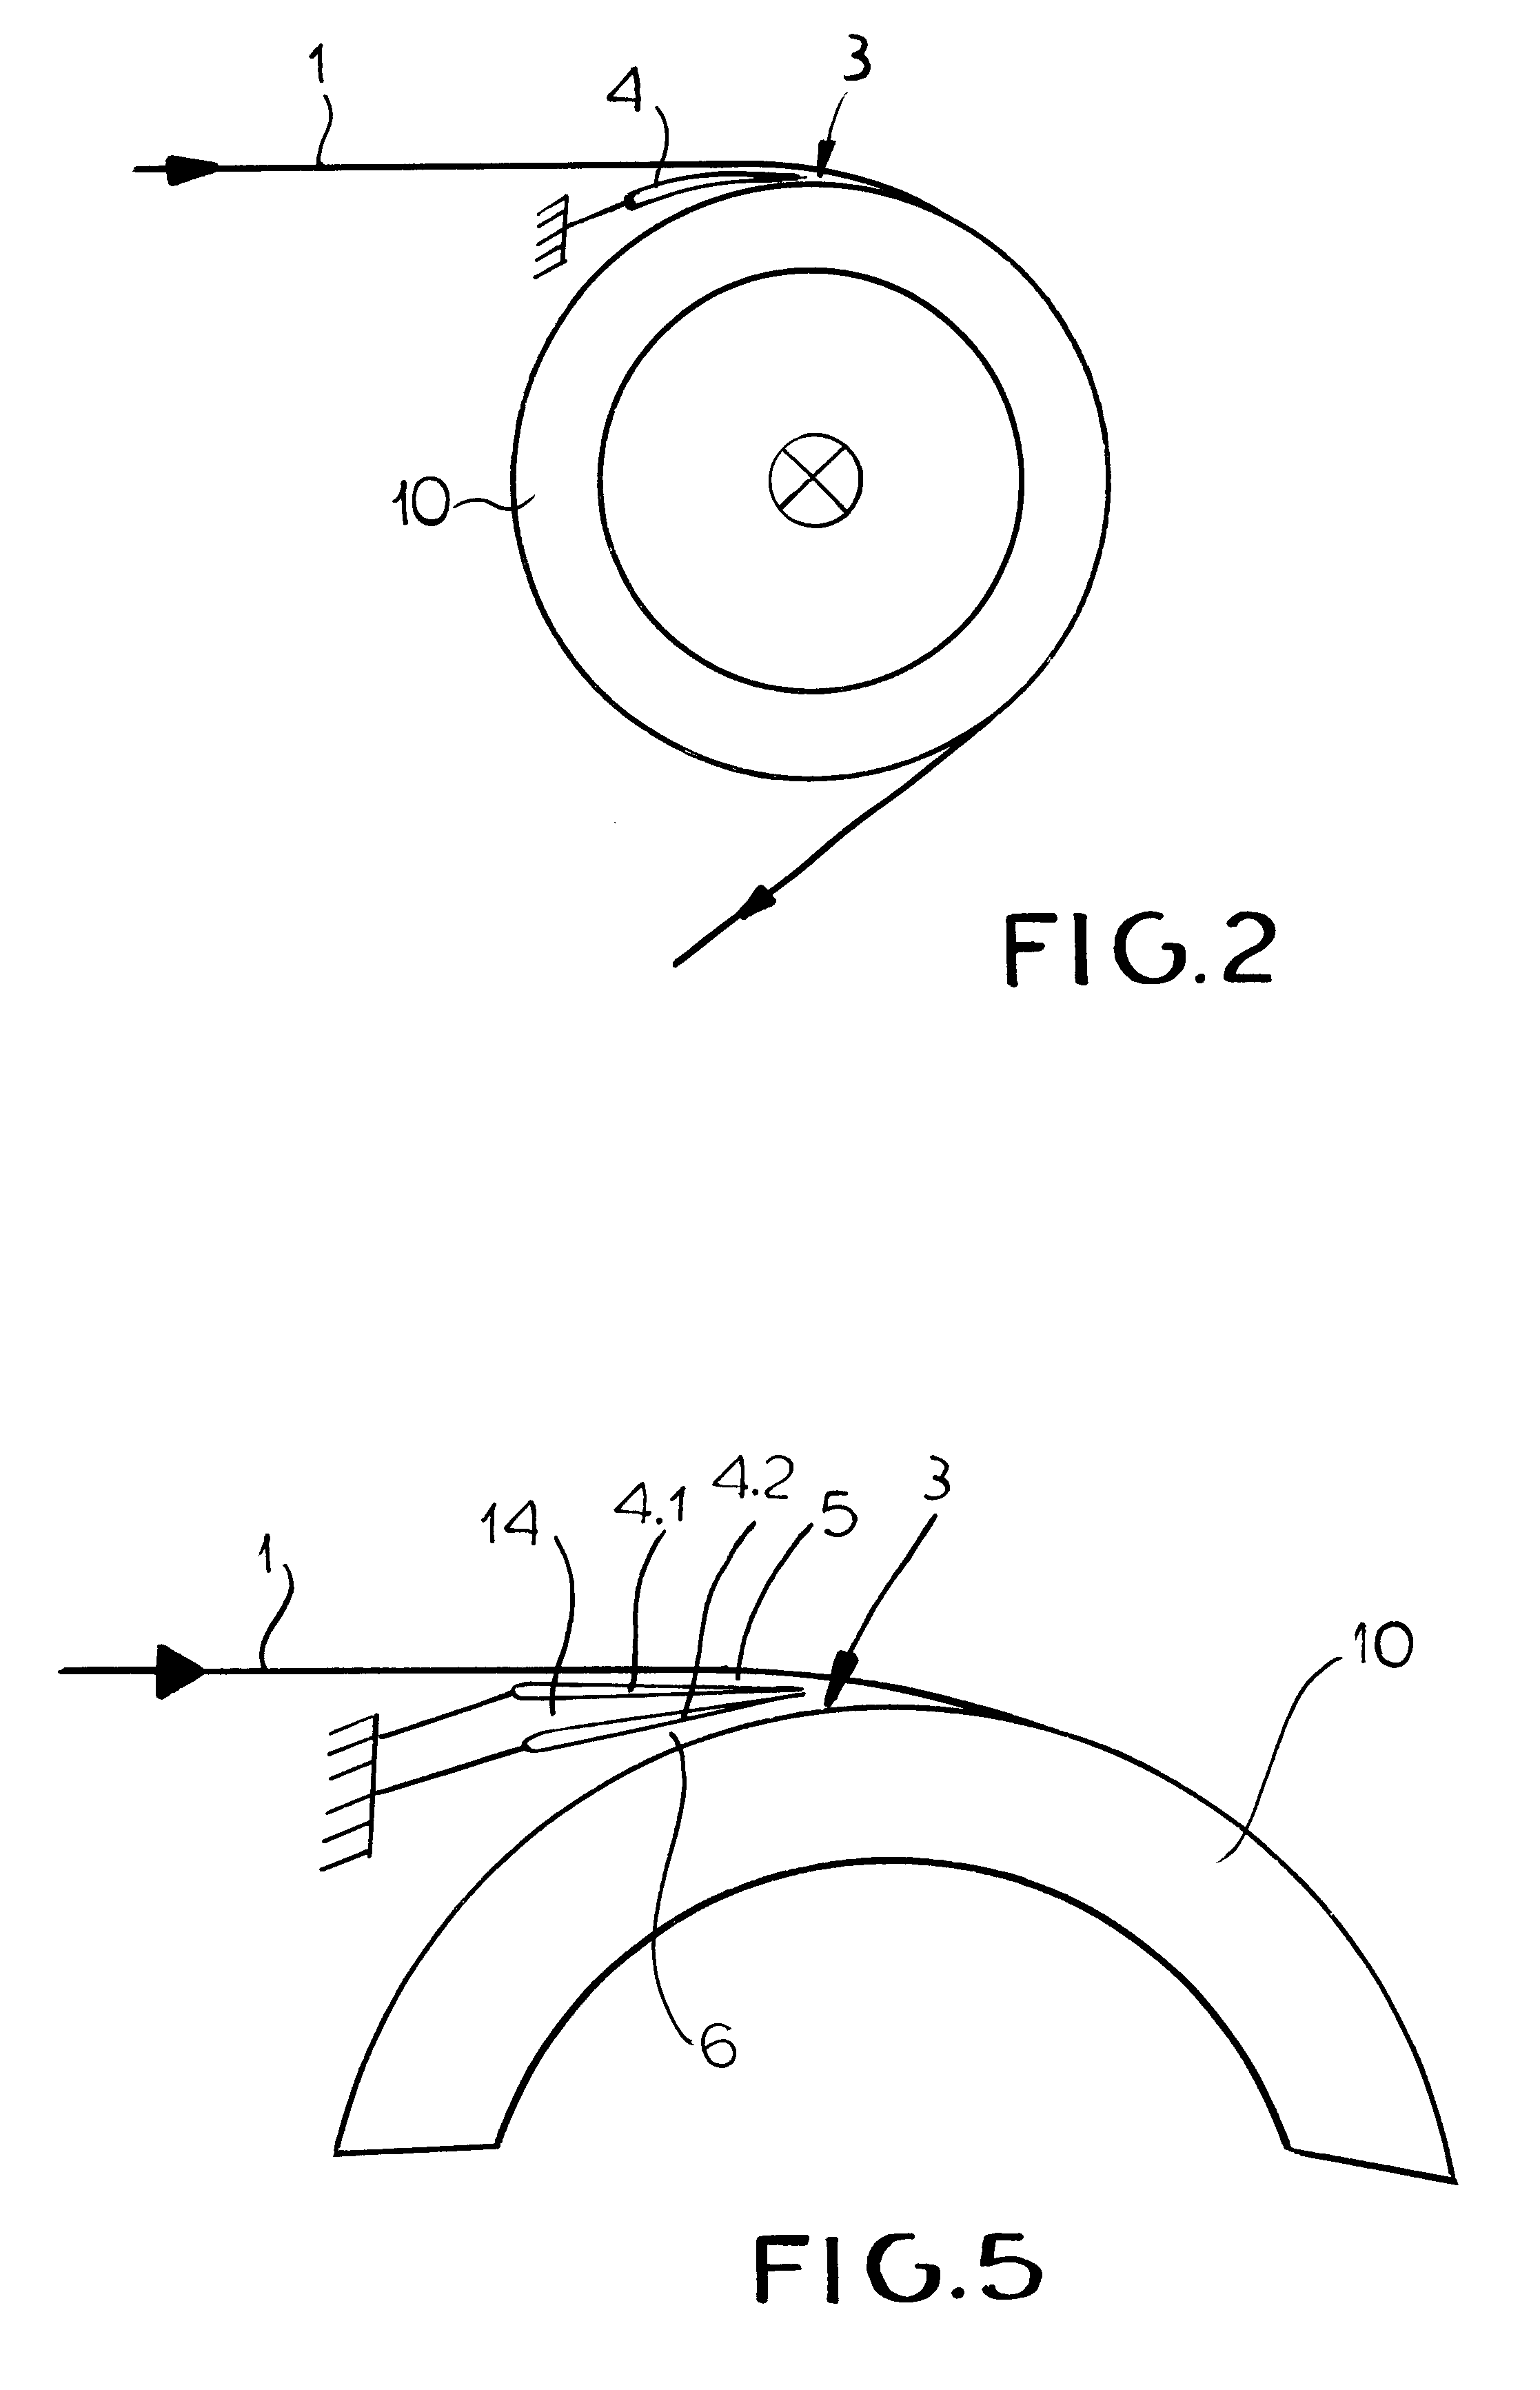 Method and device for reducing the volume or pressure of a fluid which is driven through an opening by moving surfaces